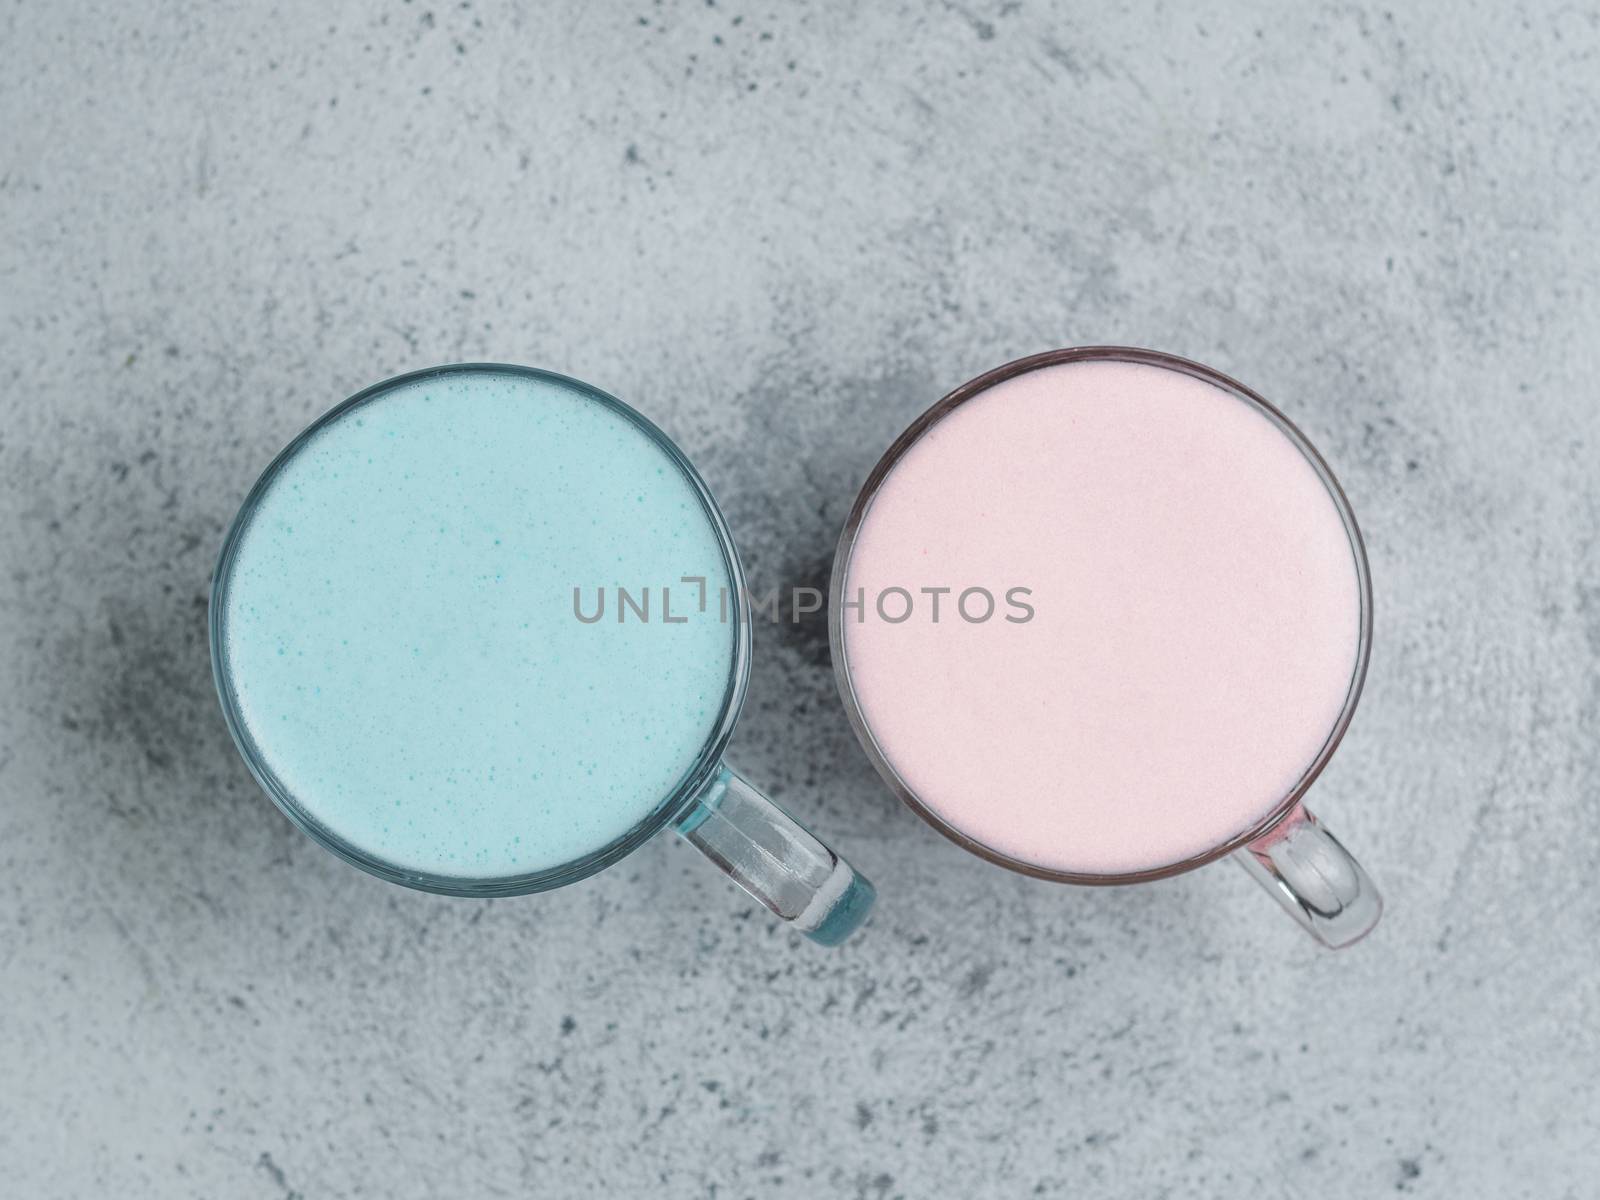 Trendy drink: Blue and pink latte. Hot butterfly pea latte or blue spirulina latte and pink beetroot or raspberry latte on gray cement textured background. Copy space for text. Top view or flat lay.